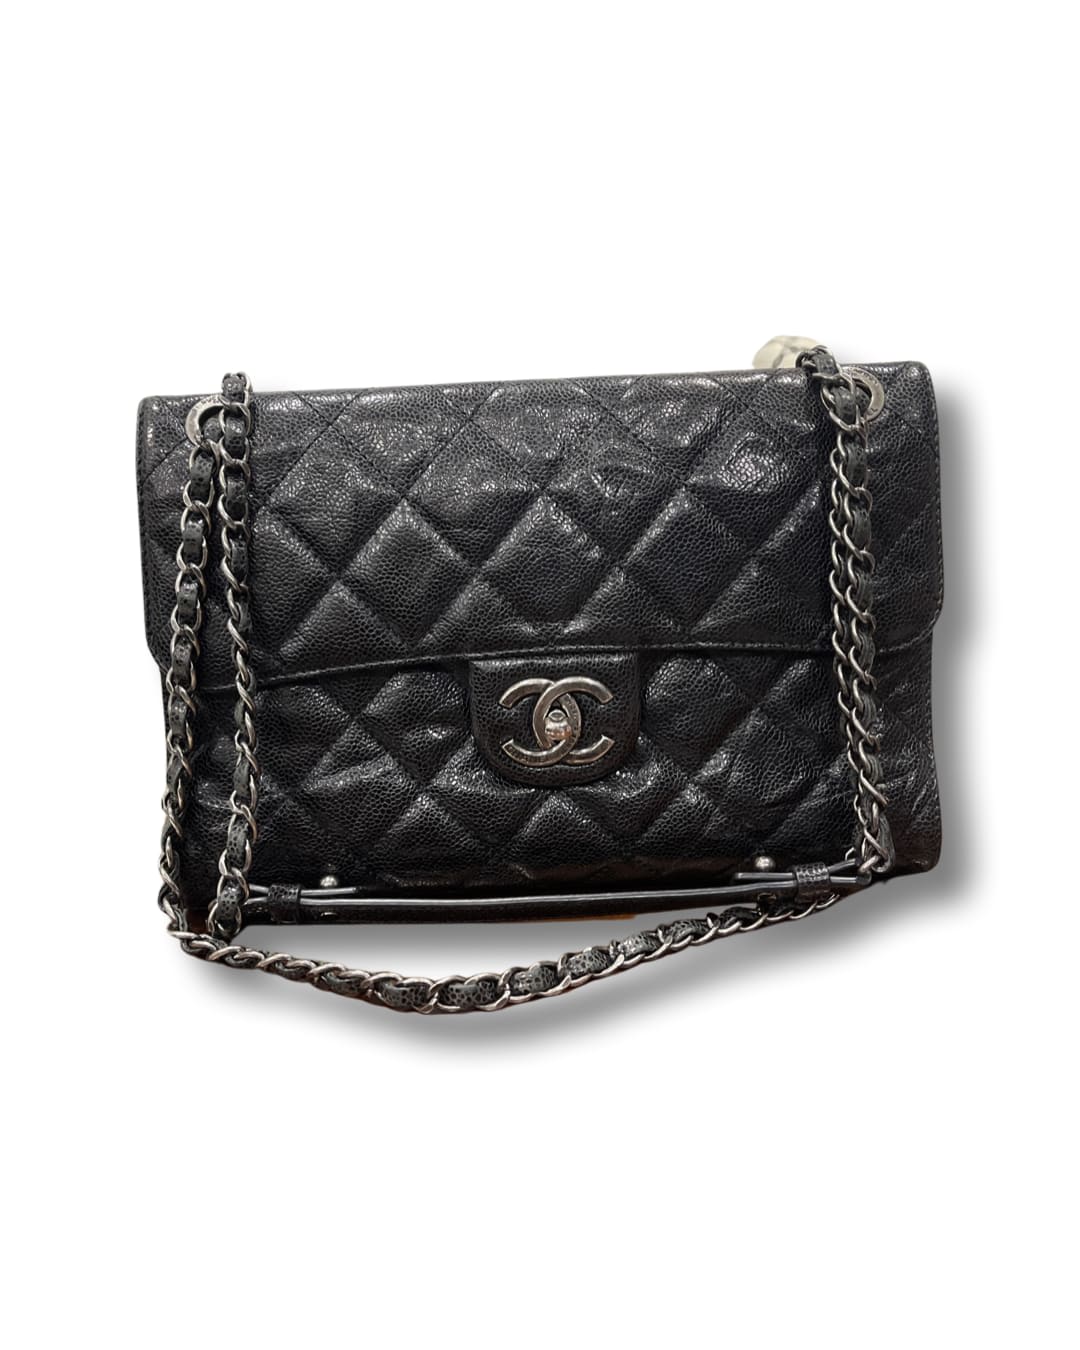 Chanel CC Crave Flap Bag Quilted Glazed Caviar Medium - Chanel